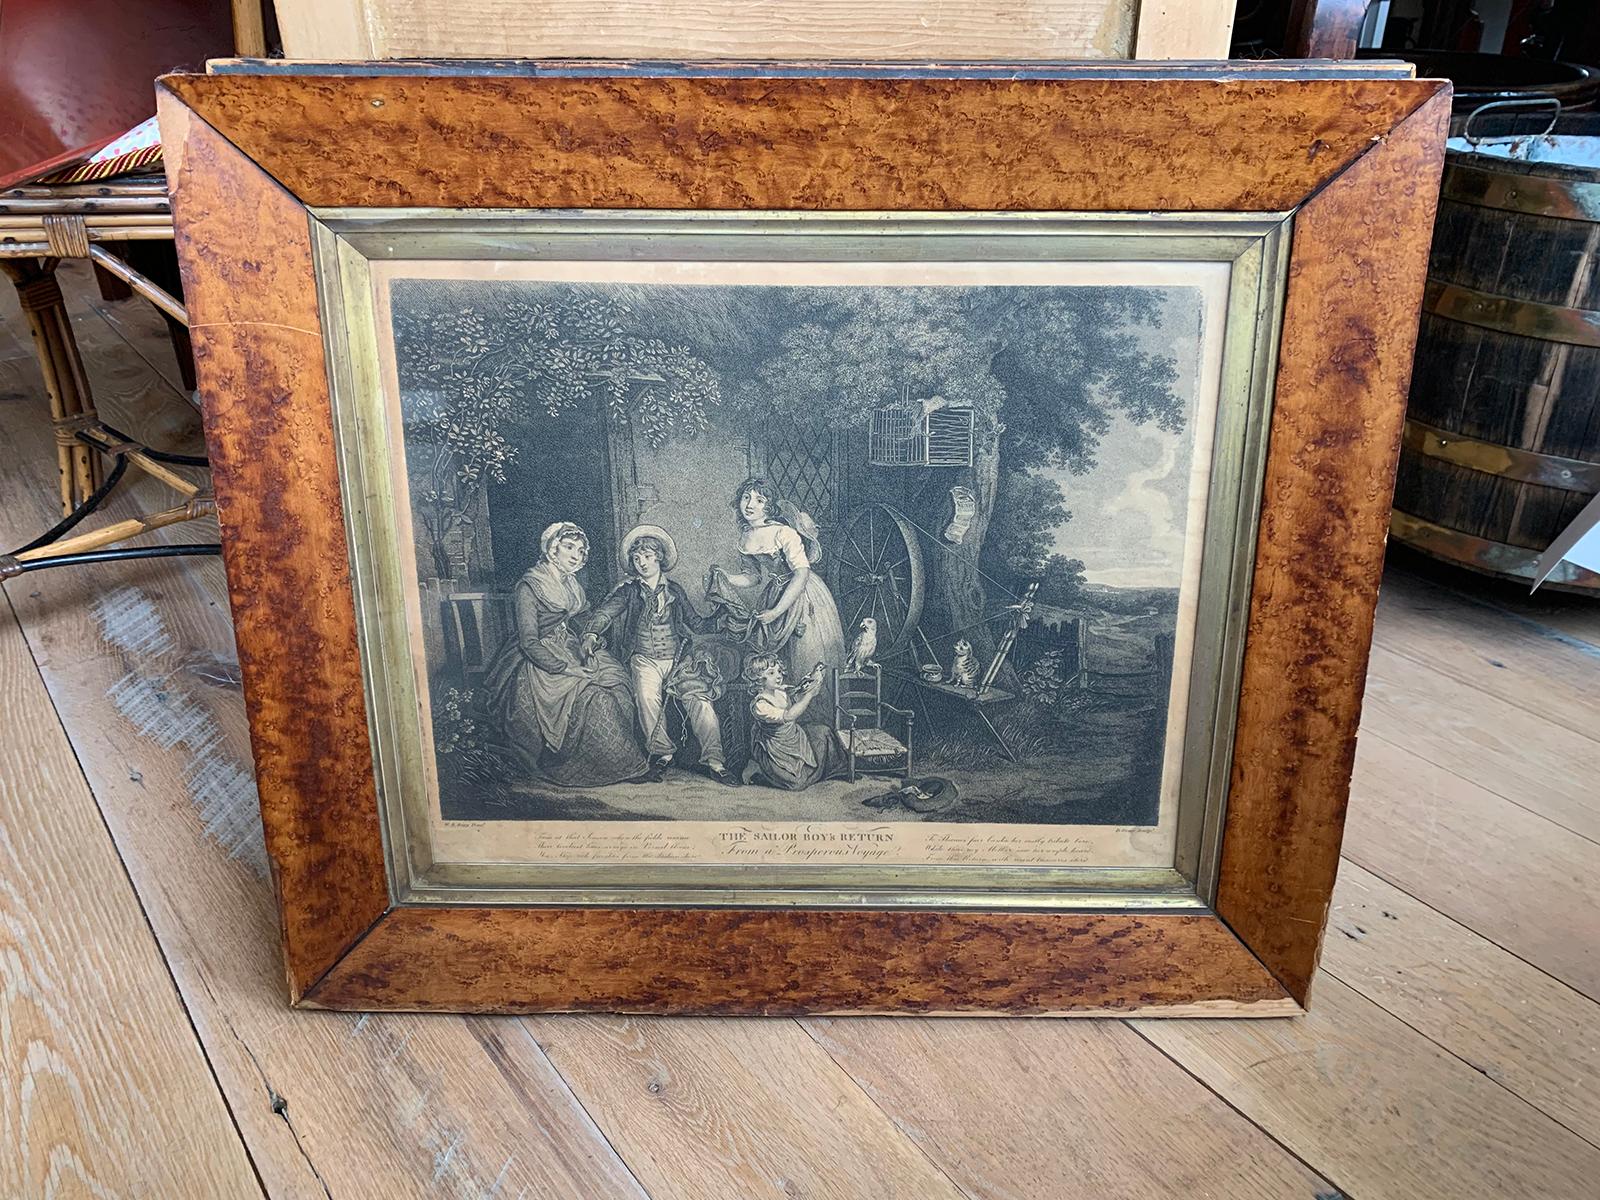 Pair of Framed English Engravings of Sailor Boys by Edward Orme, circa 1790-1800 For Sale 5